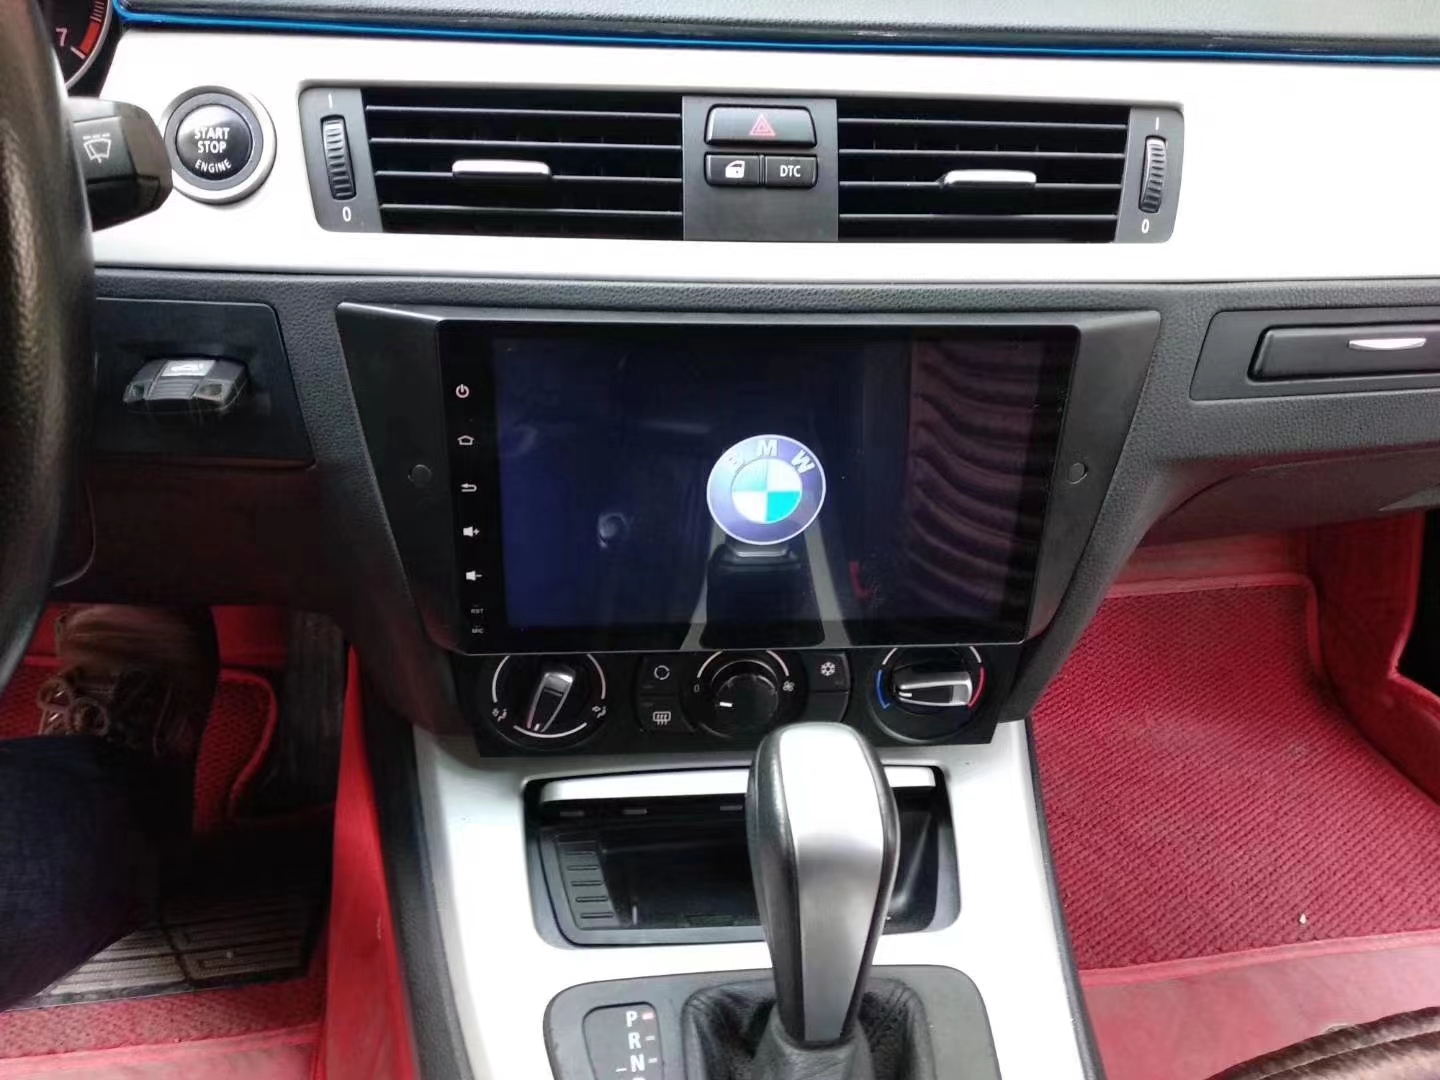 BMW 3 Series E90 Multimedia Android Car Dvd Player 